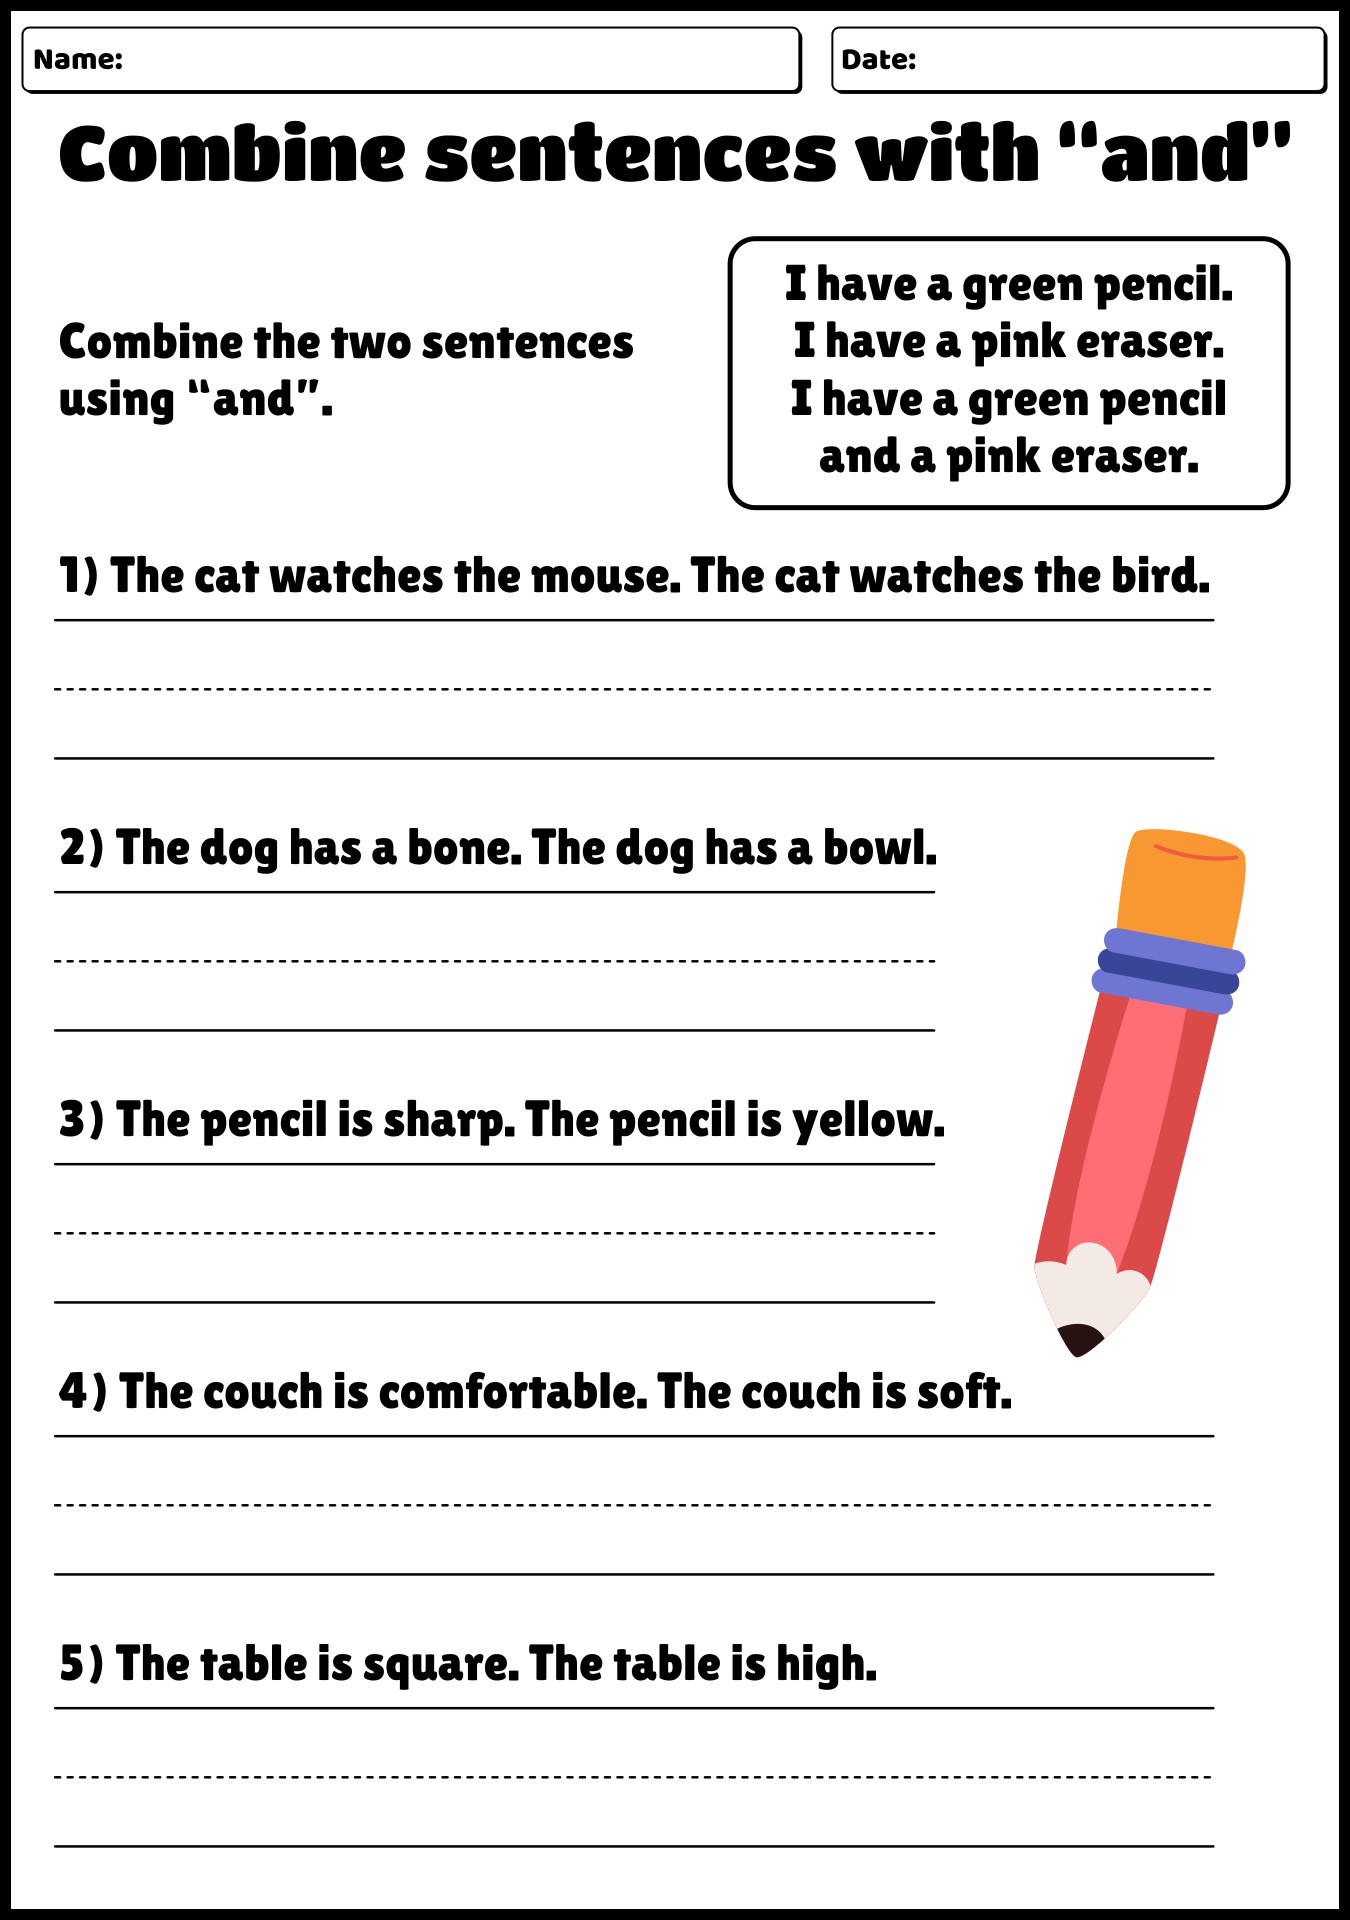 multiple-meaning-words-worksheets-5th-grade-pdf-free-printable